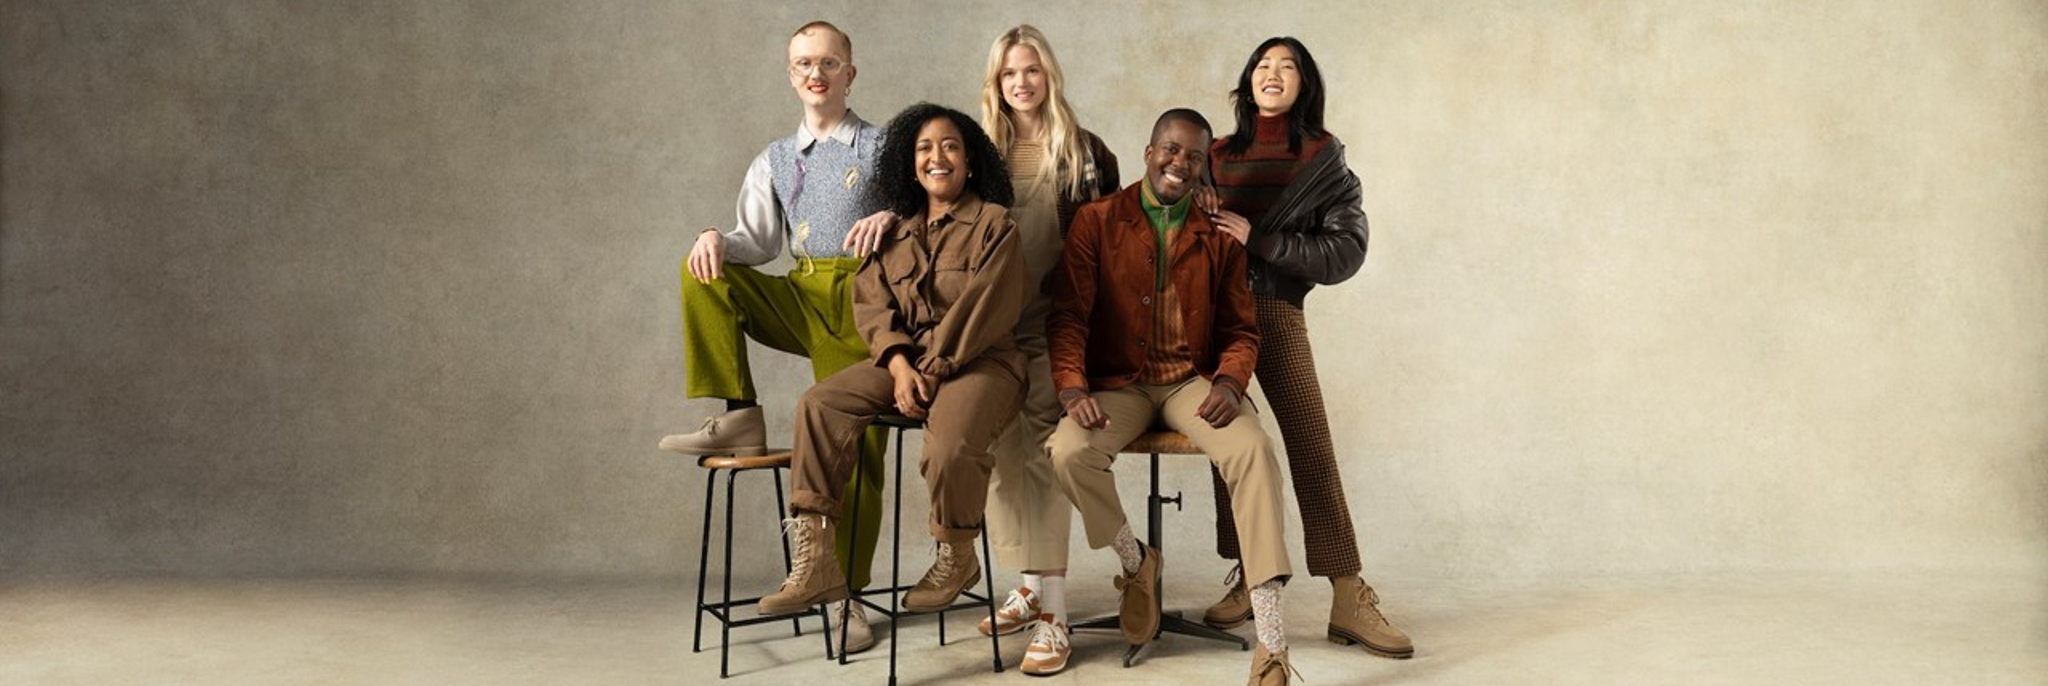 Clarks puts its best foot forward with social activists